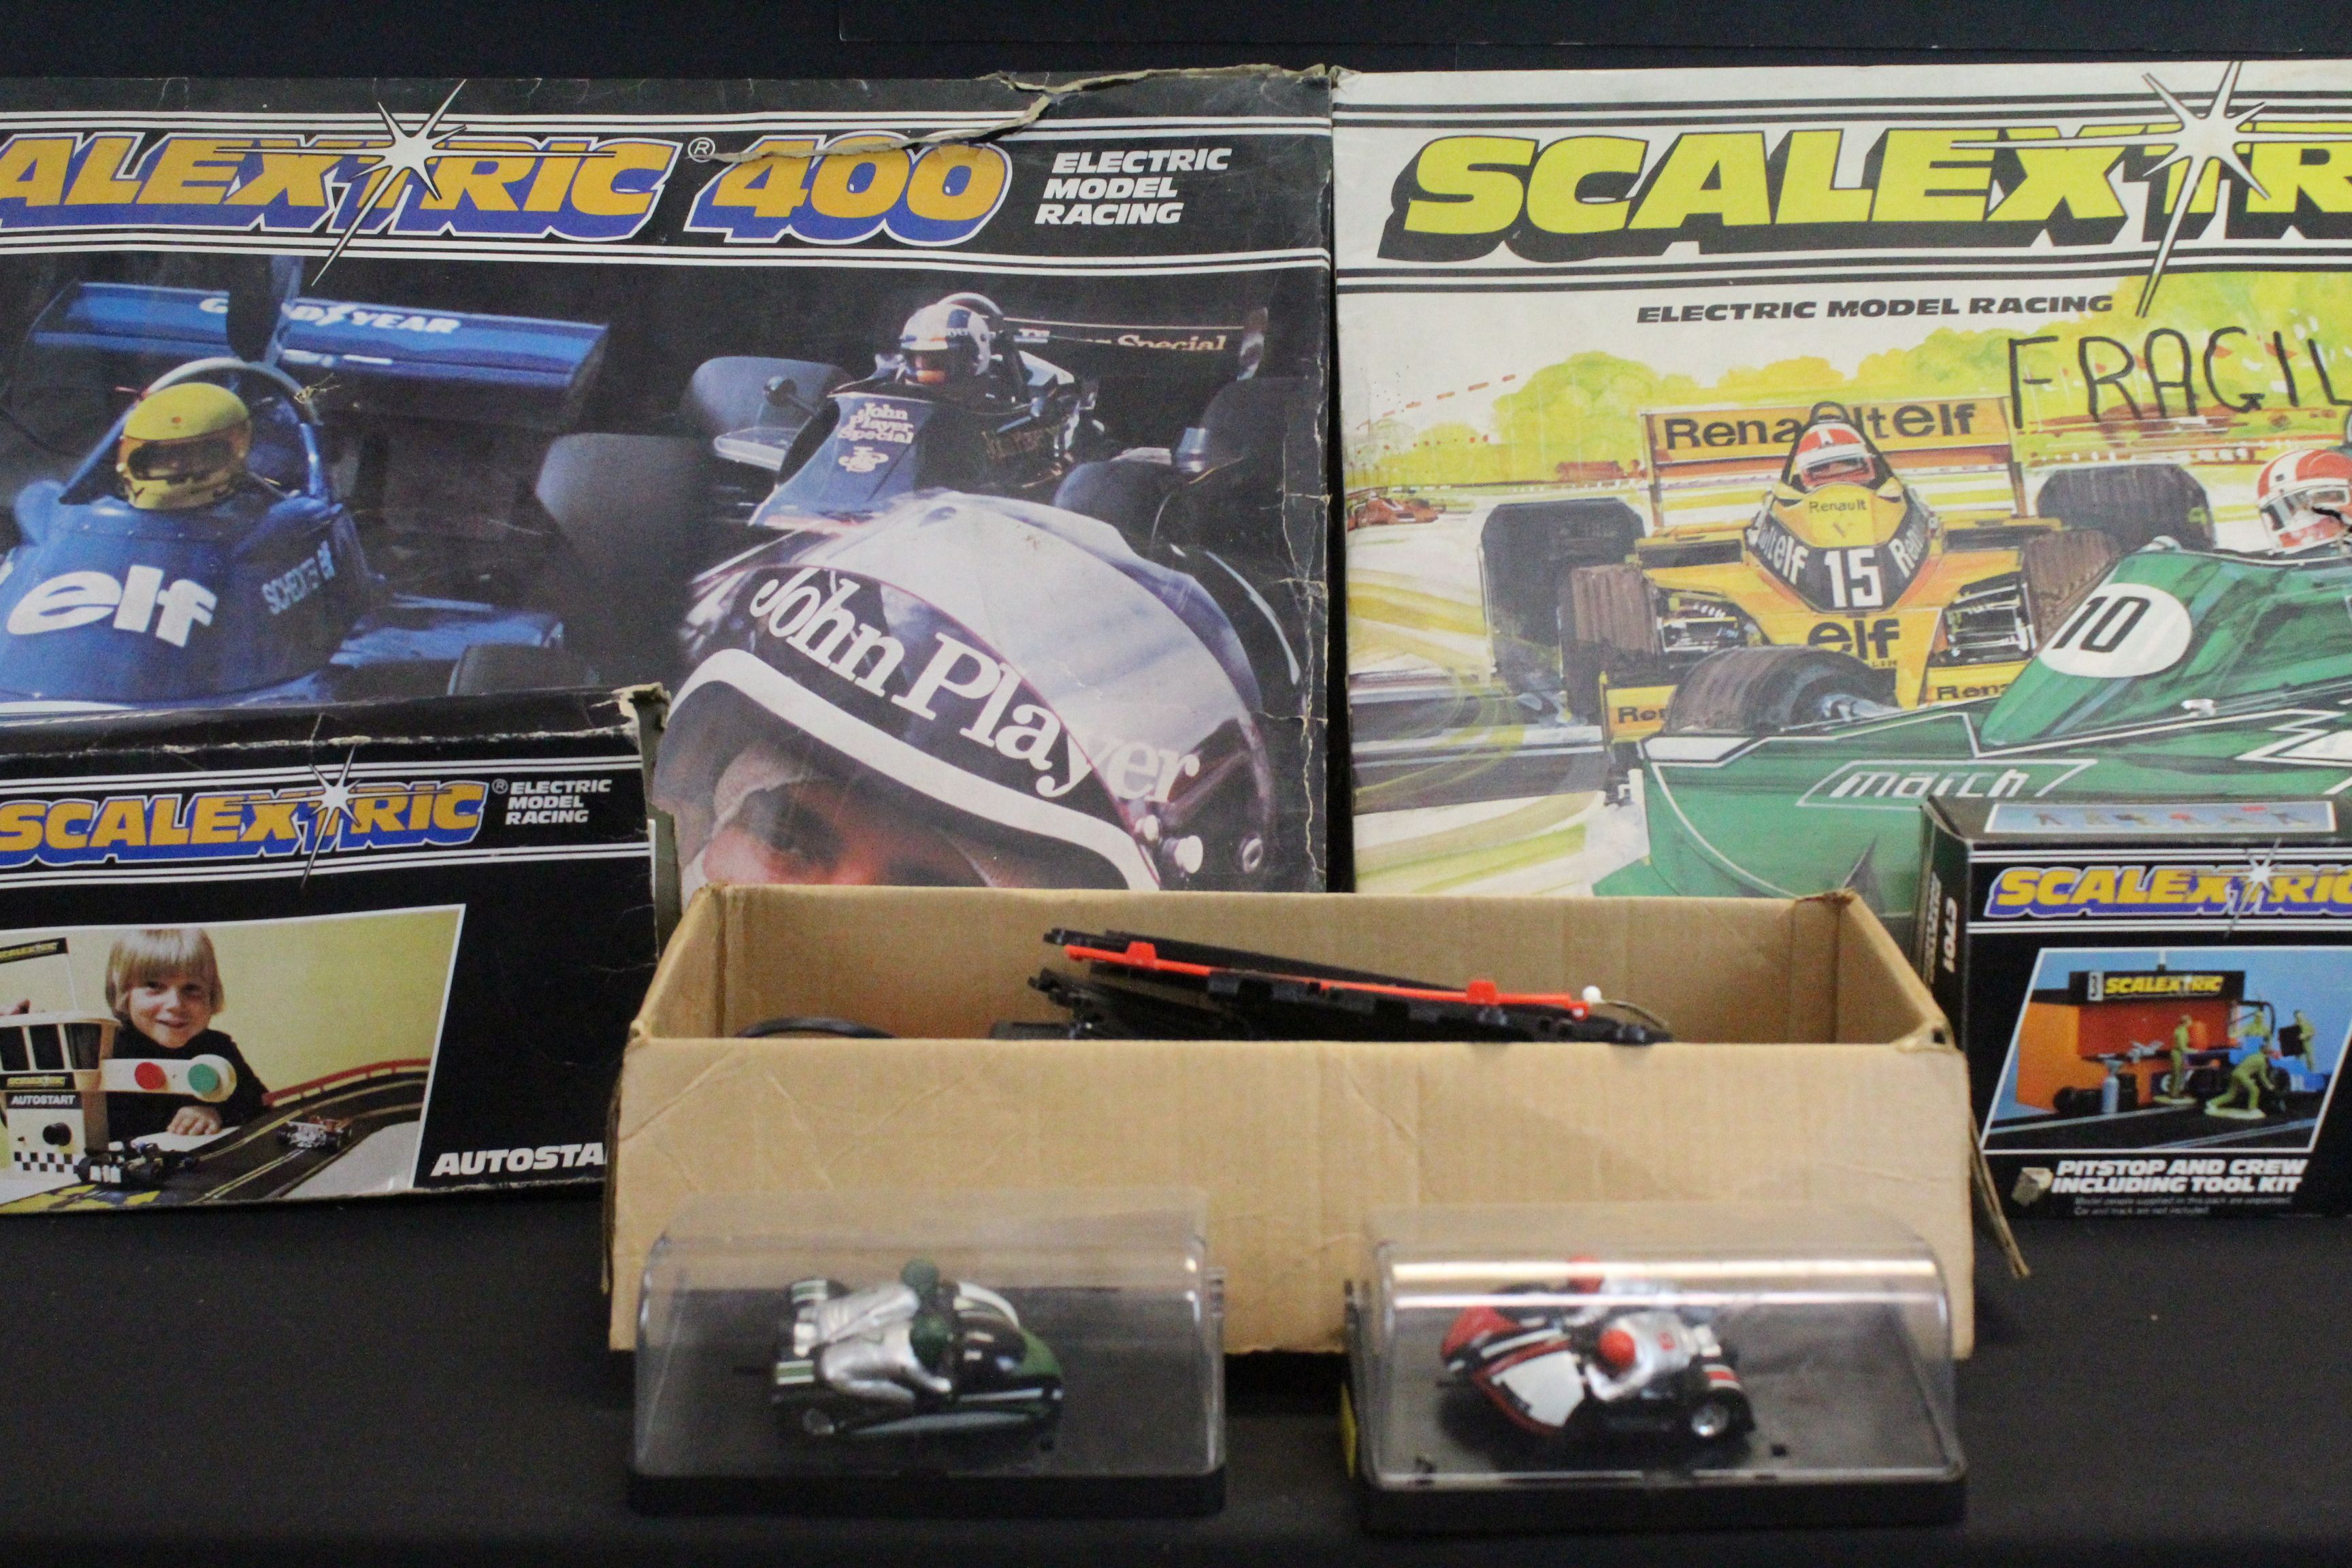 Scalextric - Two boxed Scalextric 400 electric model racing sets with slot cars (C587 - missing